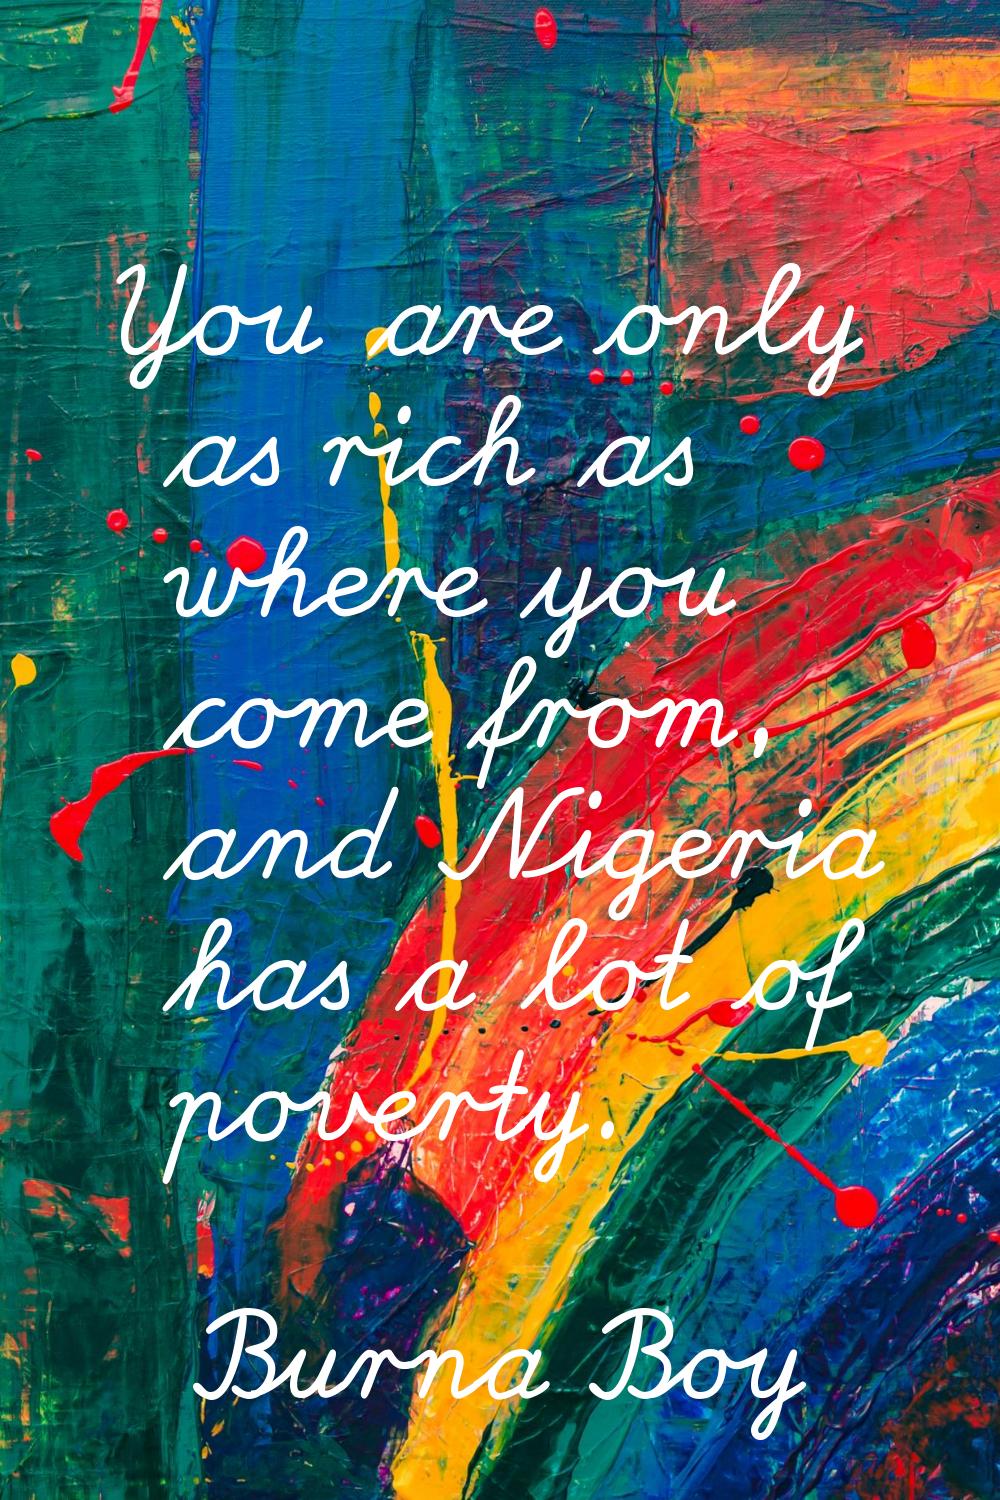 You are only as rich as where you come from, and Nigeria has a lot of poverty.